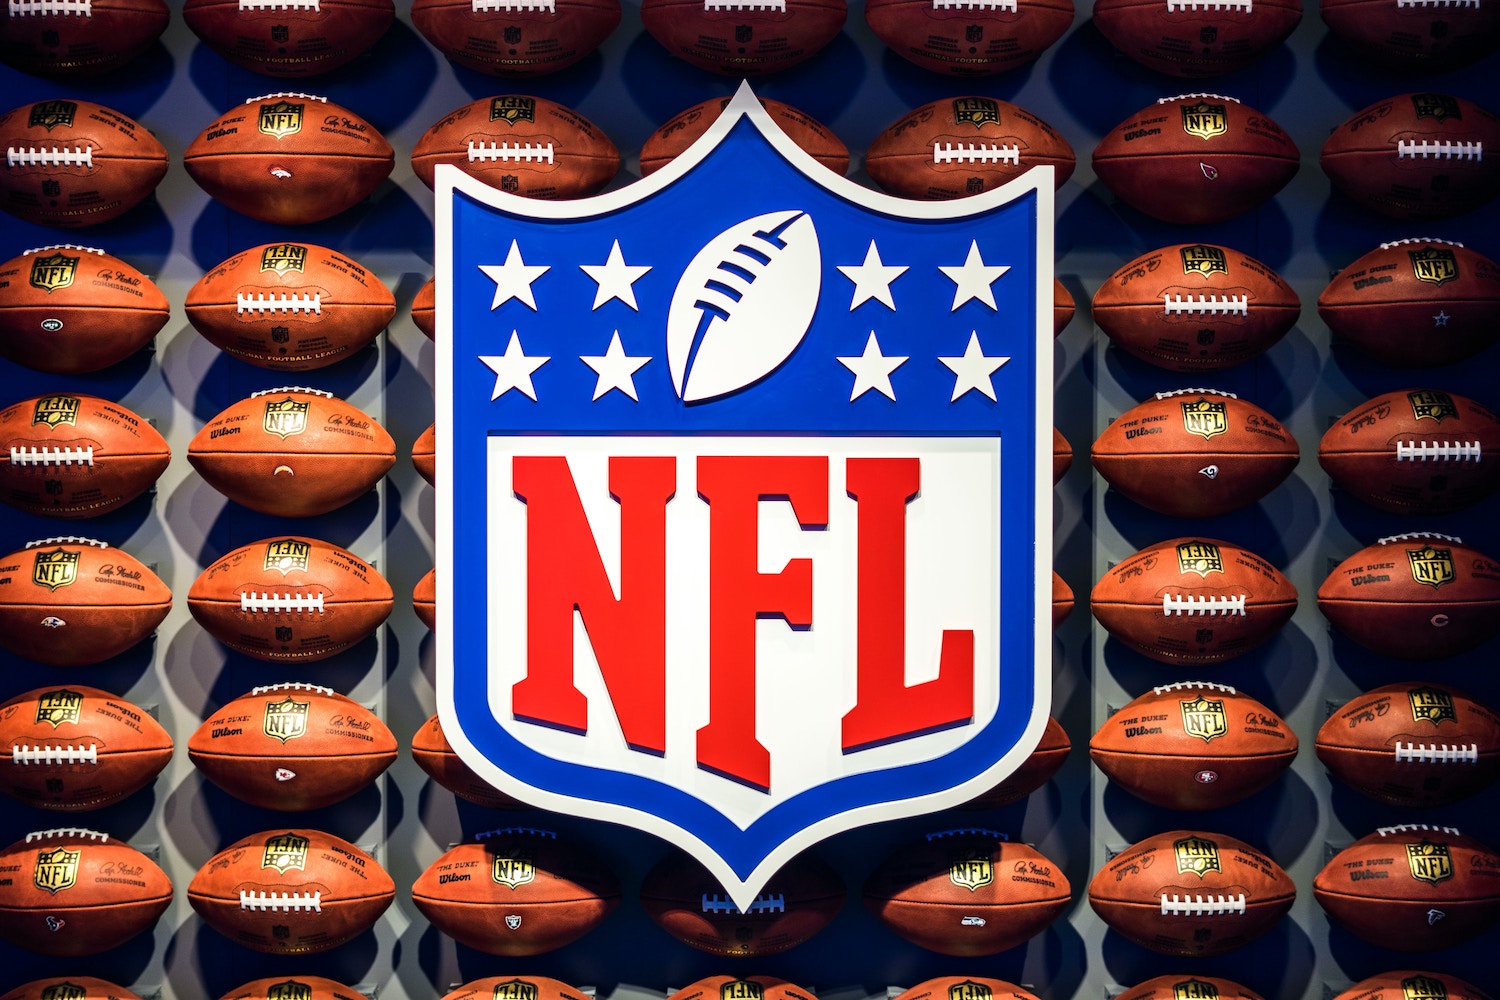 will offer multiple packages for NFL Sunday Ticket